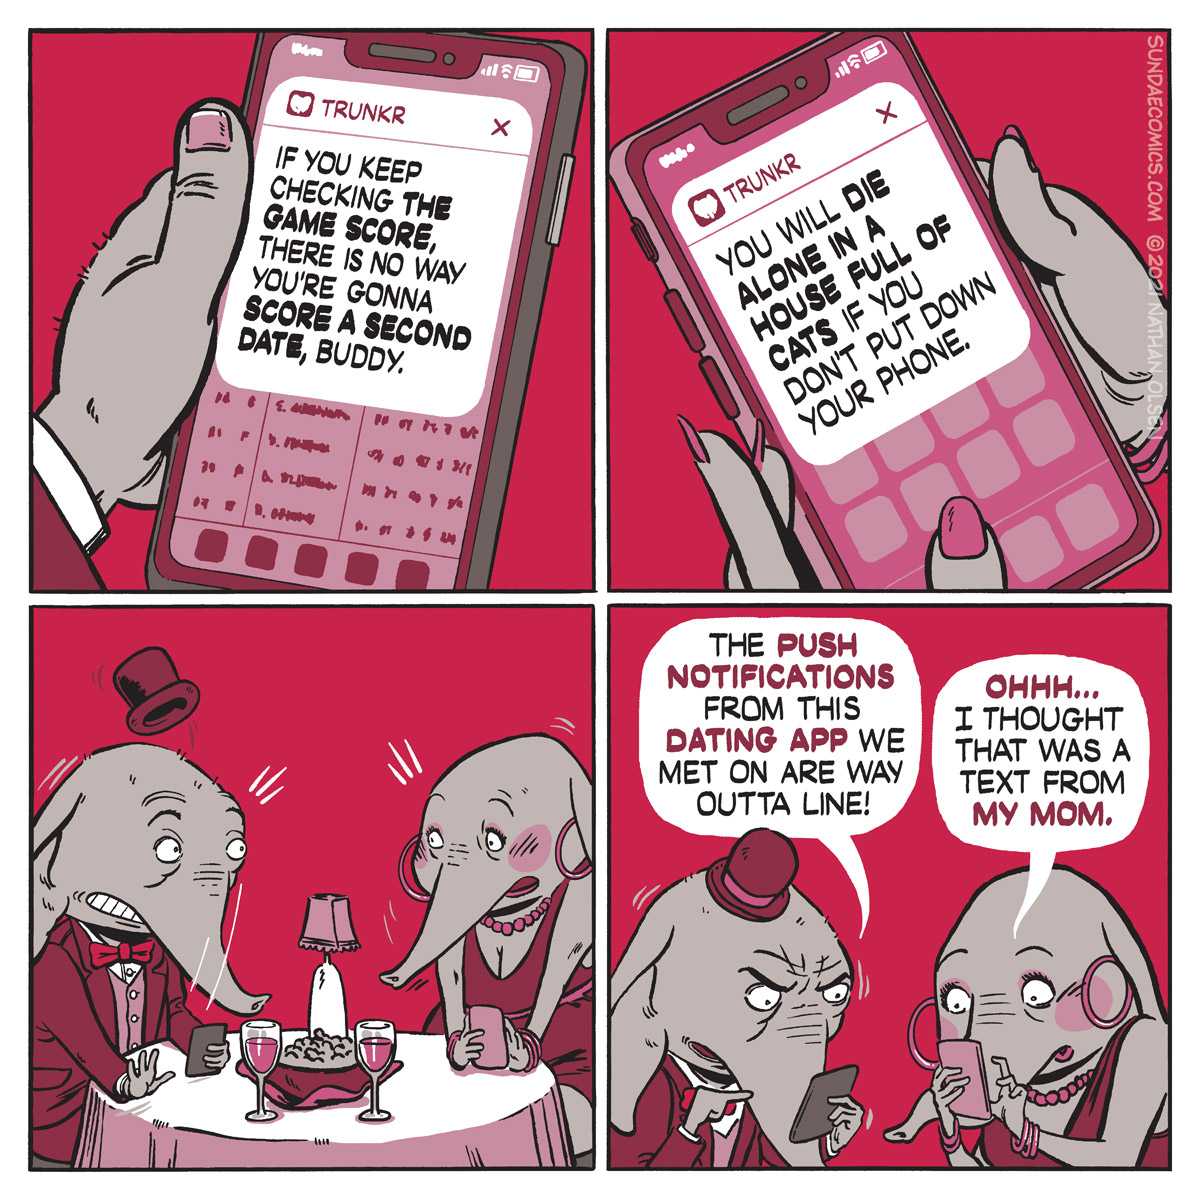 A webcomic about a couple on a date that are gently reminded to get off their phones.